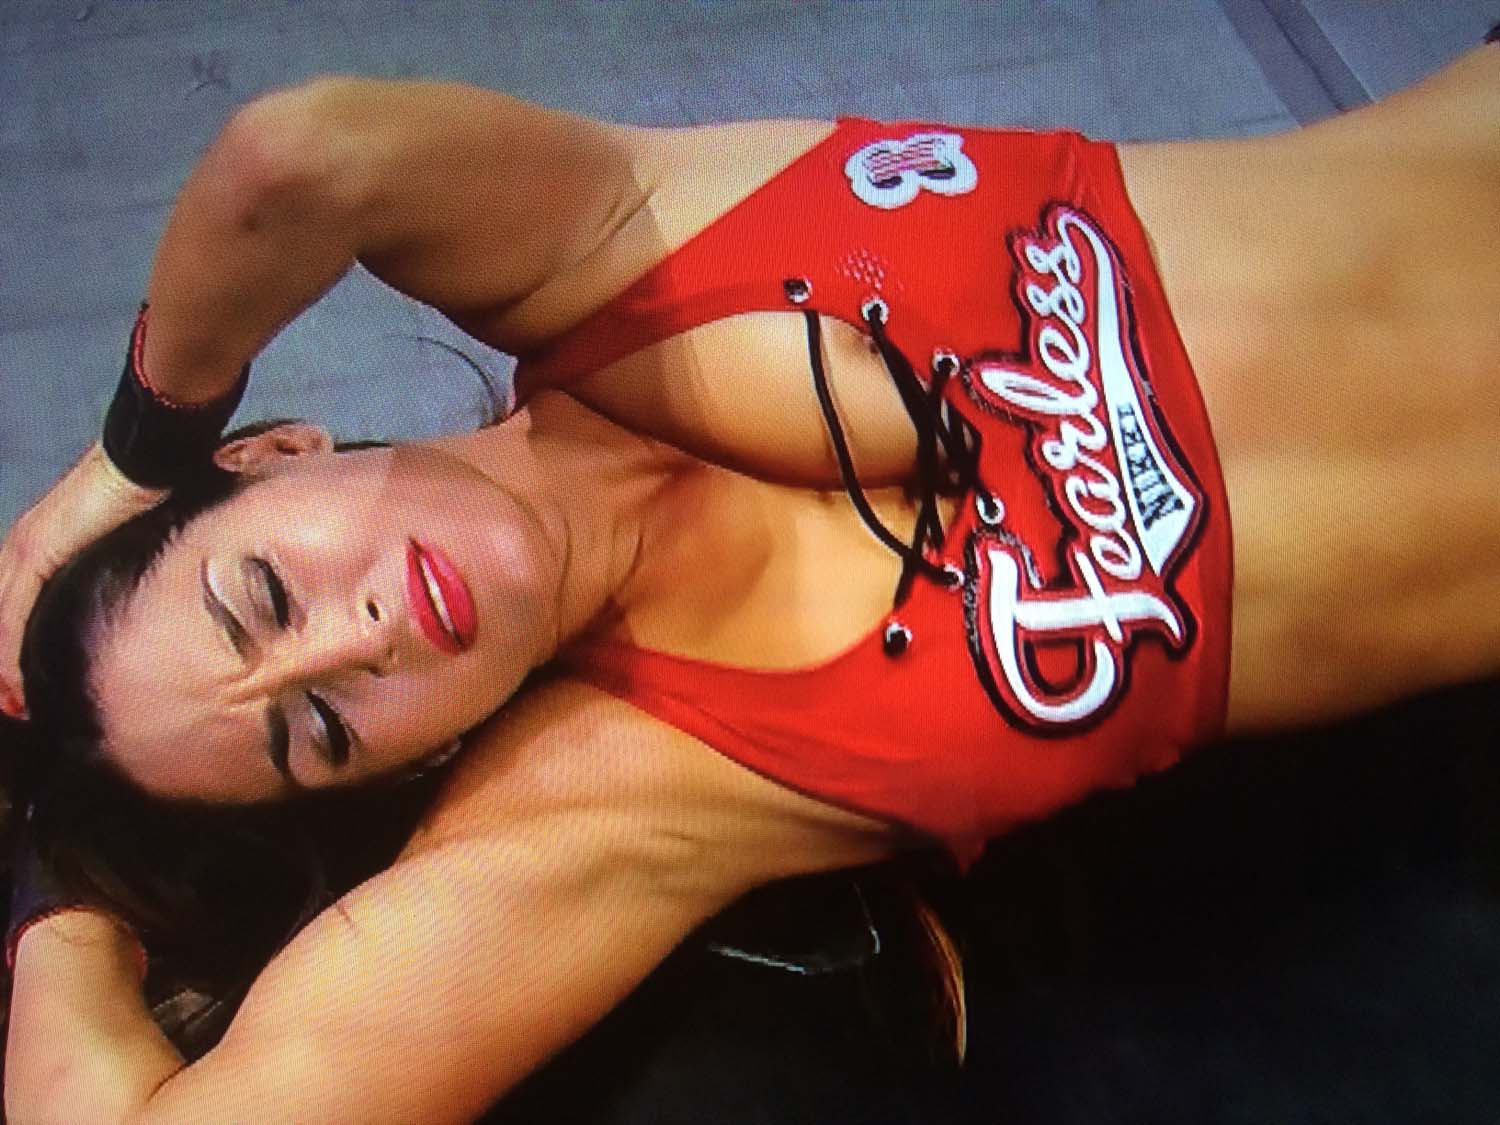 camille slack recommends nikki bella naked pictures pic